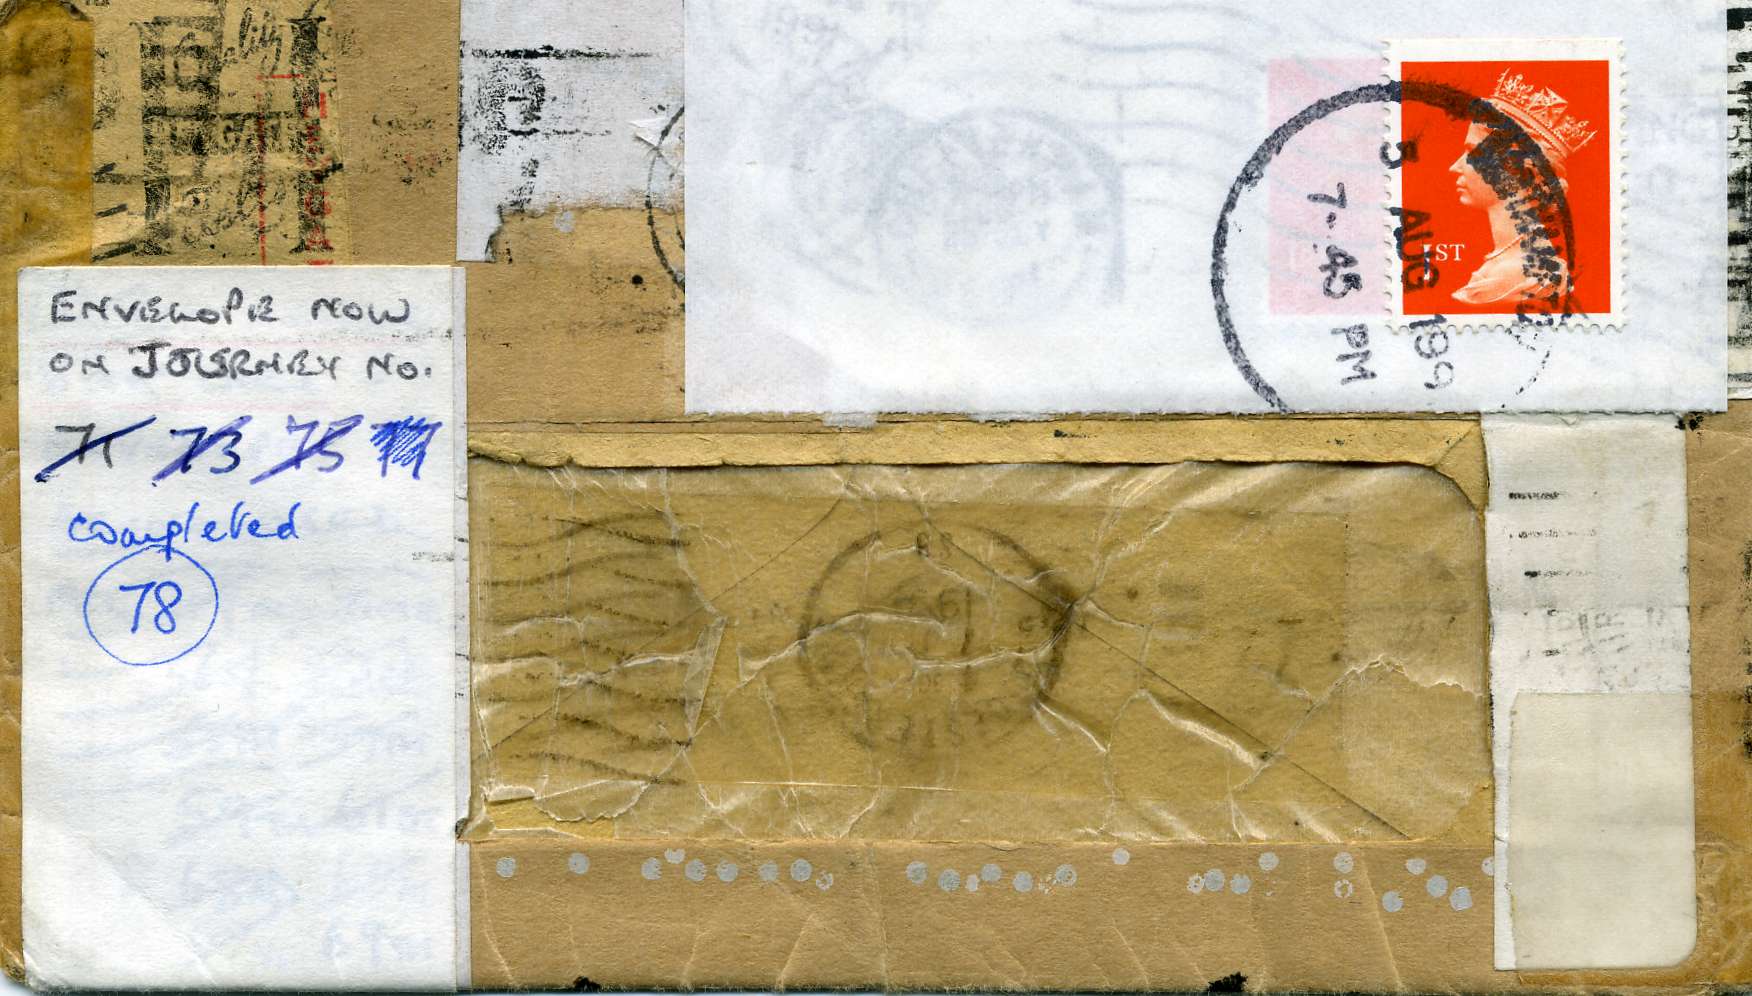 Photo of the envelope